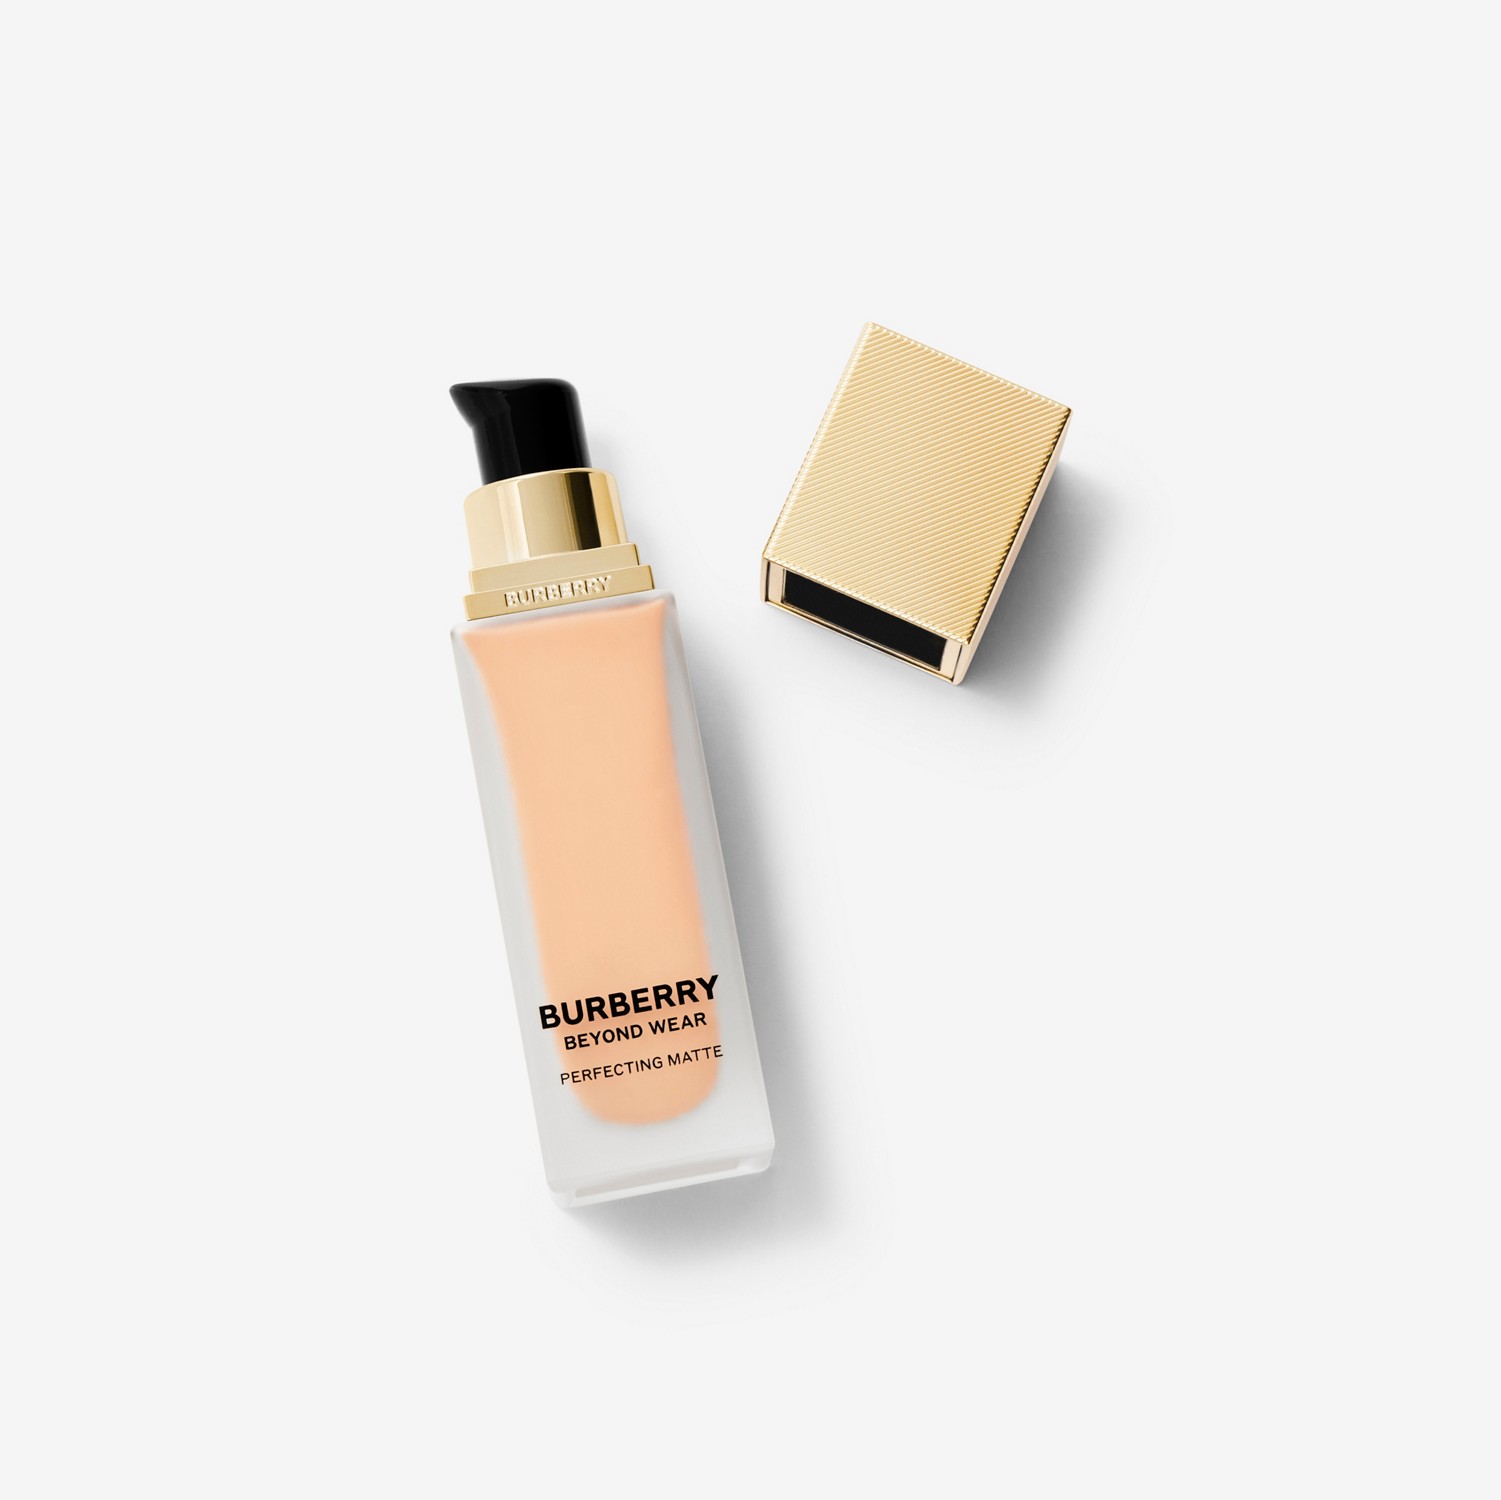 Beyond Wear Perfecting Matte Foundation – 20 Fair Cool - Mulheres | Burberry® oficial